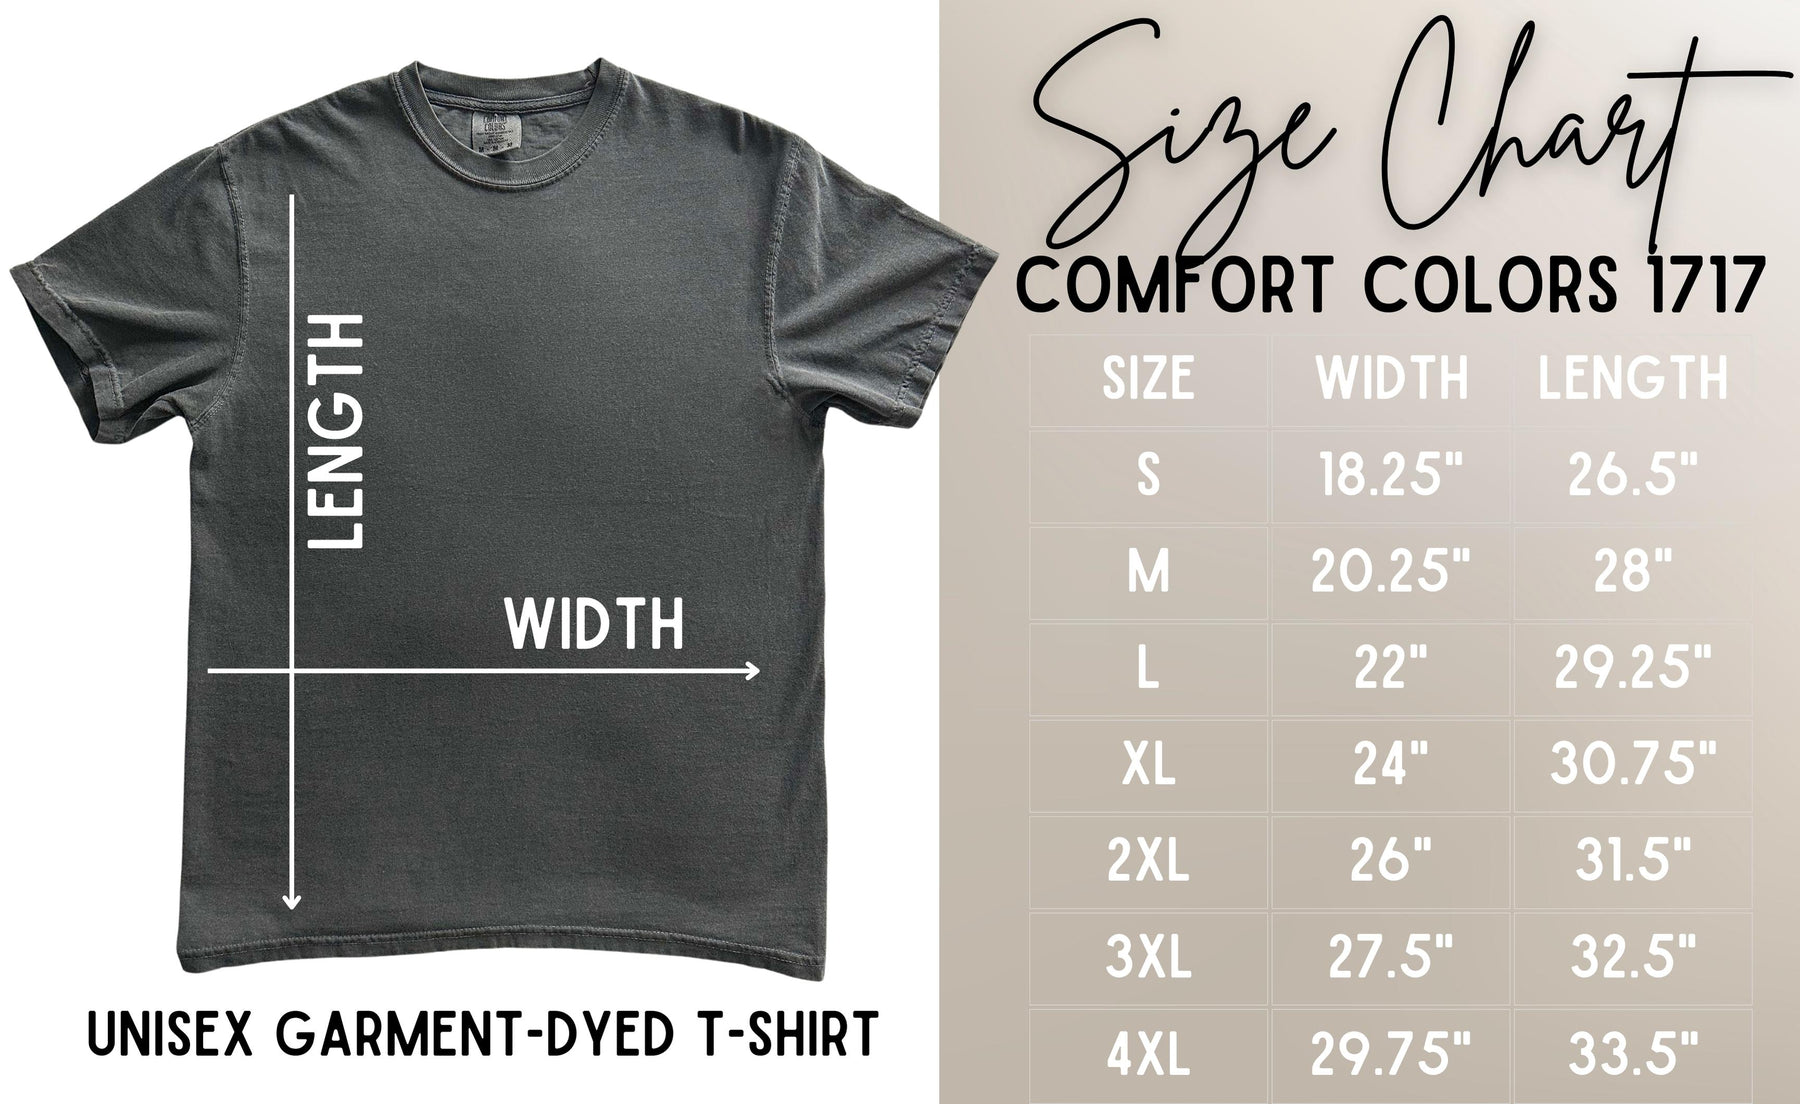 Hold on & Pray - Comfort Colors T-Shirt Rose with Grace LLC